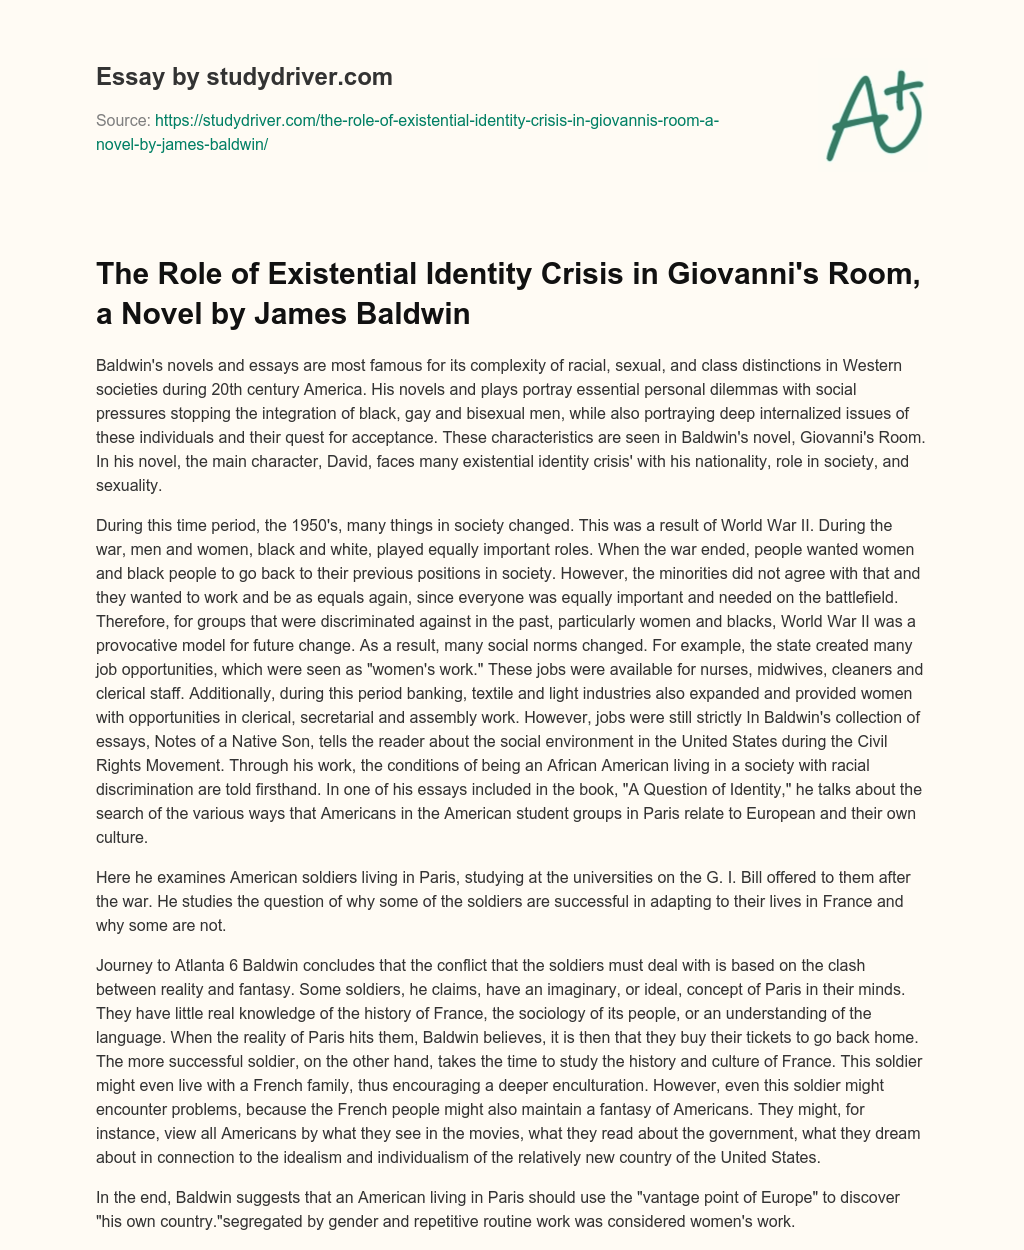 The Role of Existential Identity Crisis in Giovanni’s Room, a Novel by James Baldwin essay